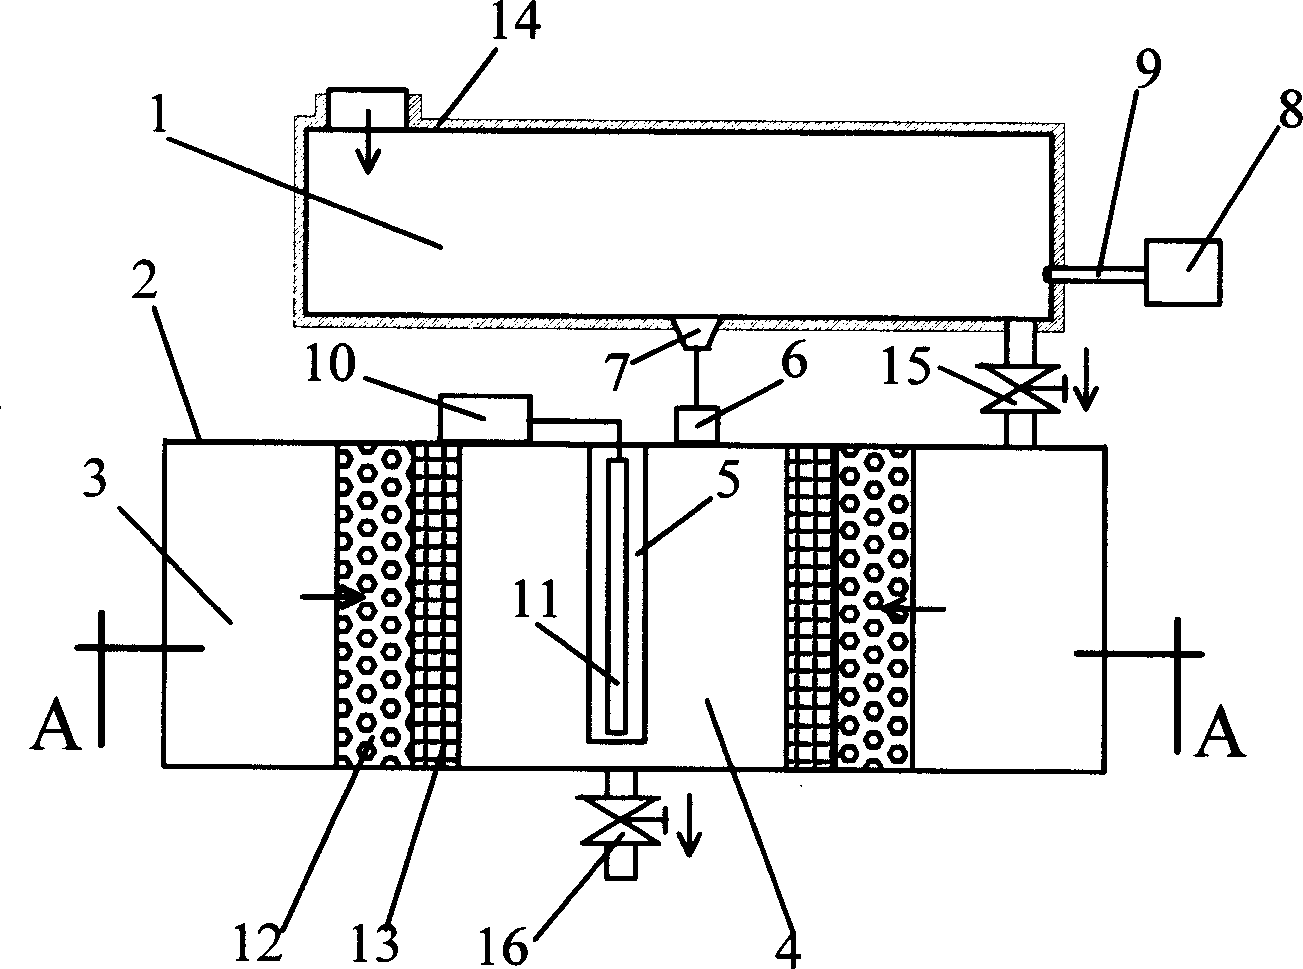 Acousto-optic sterilization treatment device for drinking water